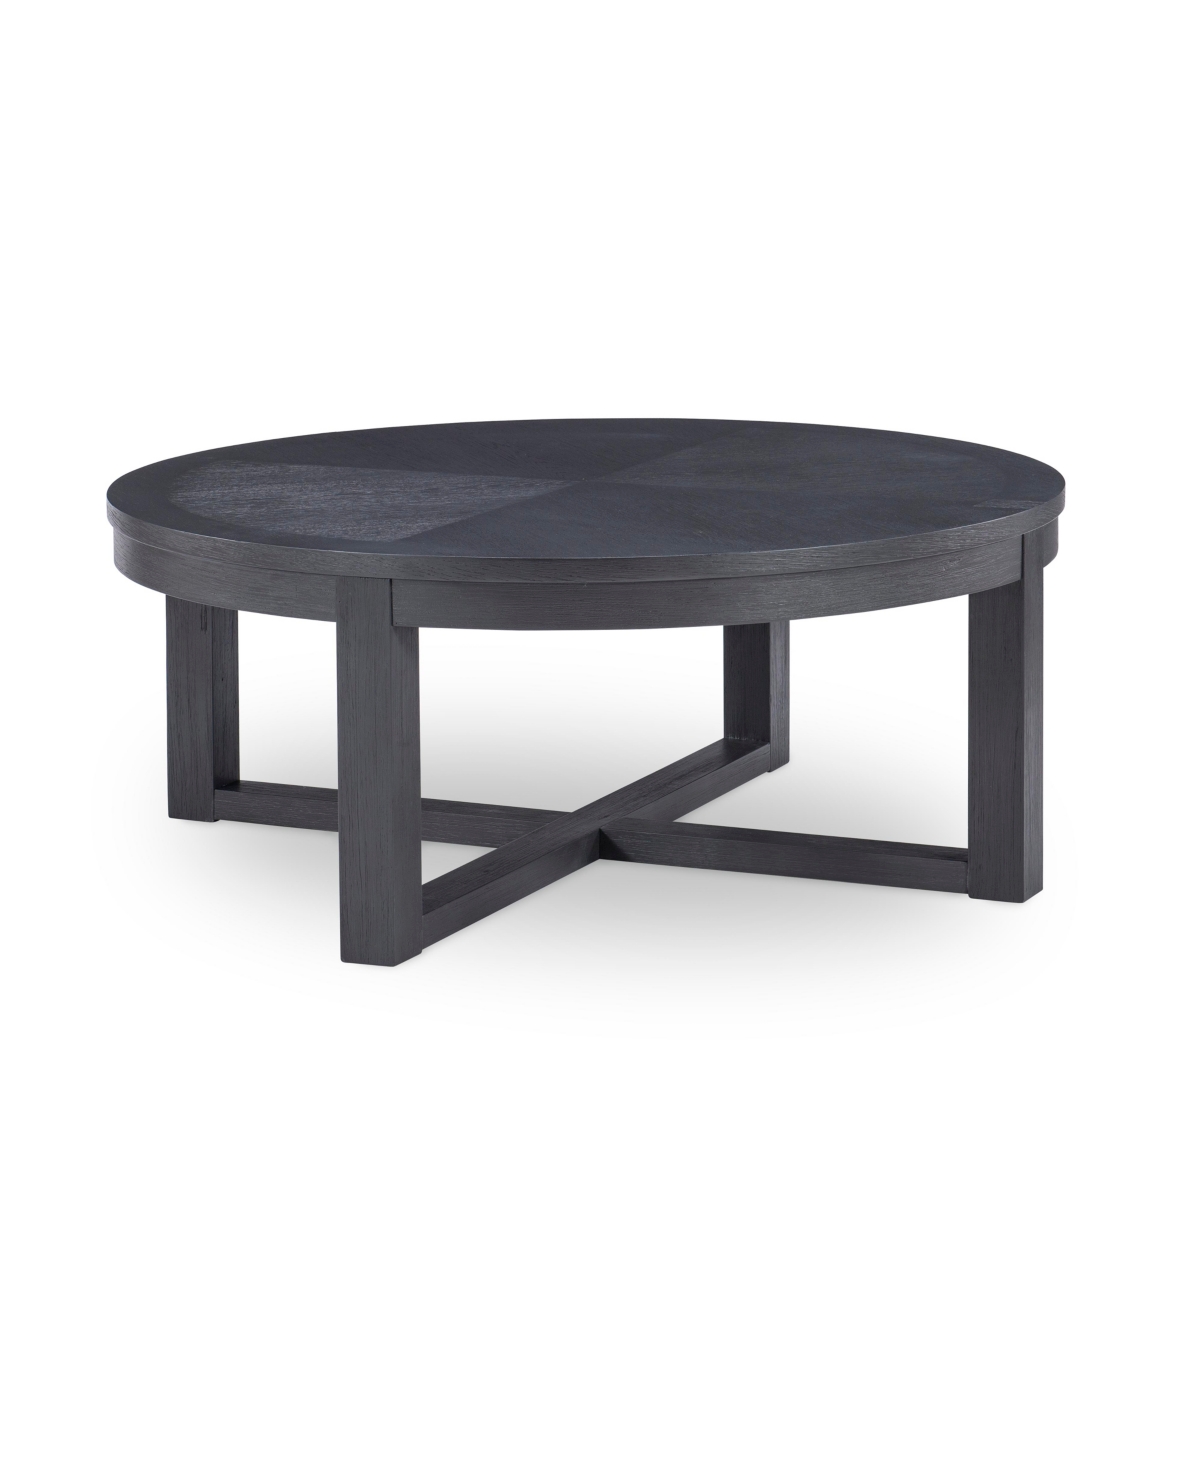 Furniture Westwood Round Cocktail Table In Charred Oak